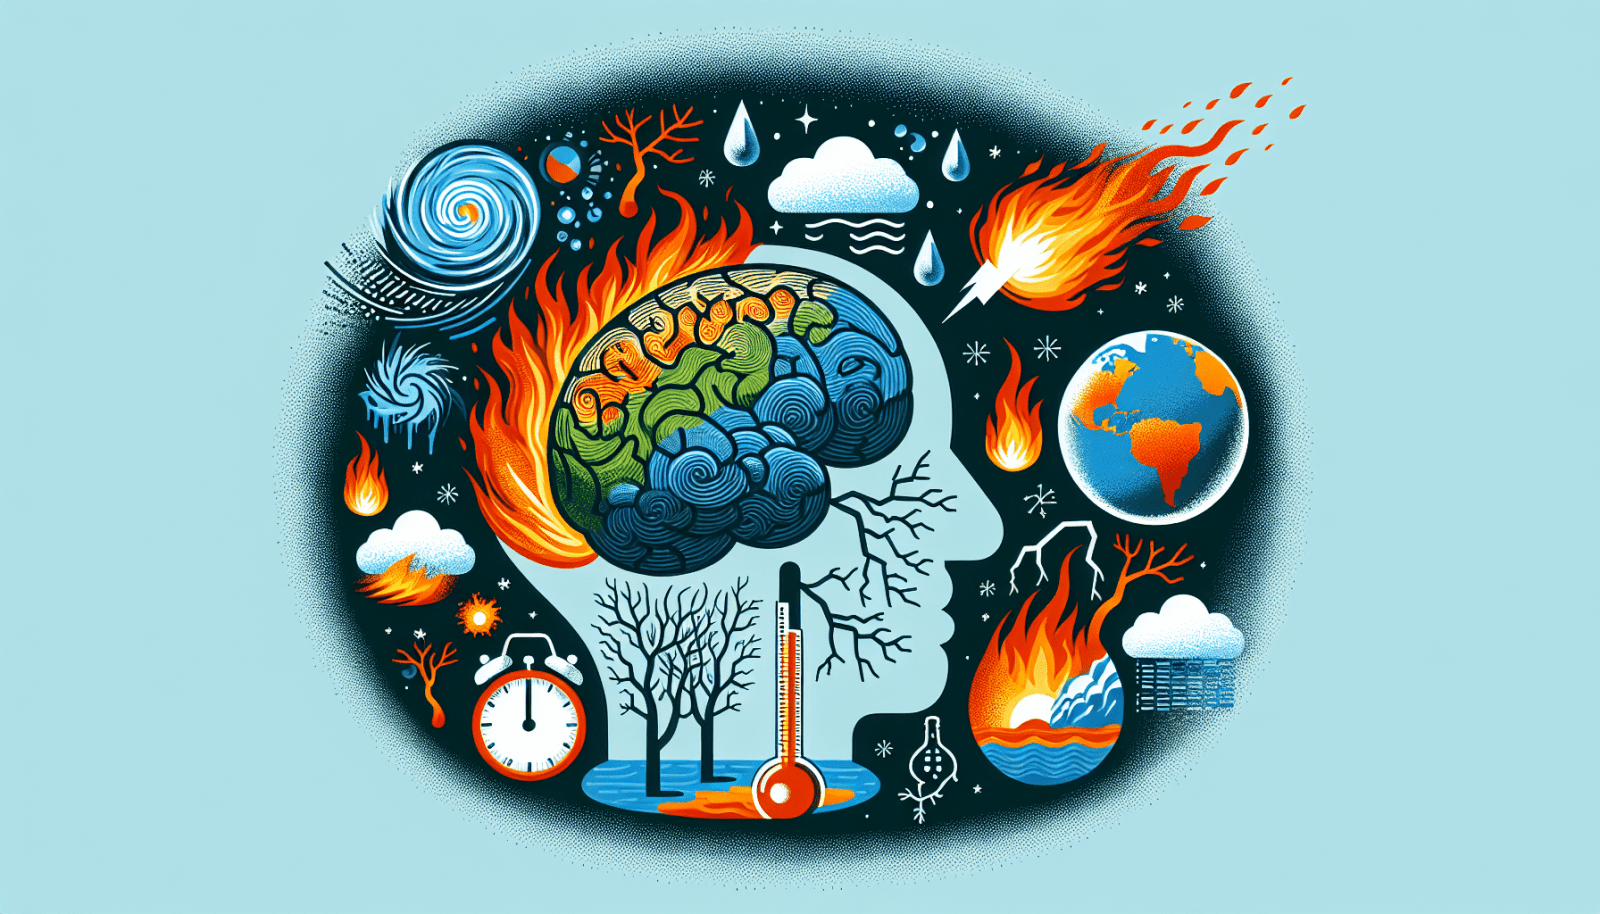 An illustration depicting various climate change elements arranged circularly around a central brain-shaped tree, with half flourishing and half barren, against a blue background. The elements include a tornado, water droplets, a snowflake, a healthy tree, a stopwatch, a thermometer with rising temperatures, fire, a cracked earth, and a globe with heat emissions.